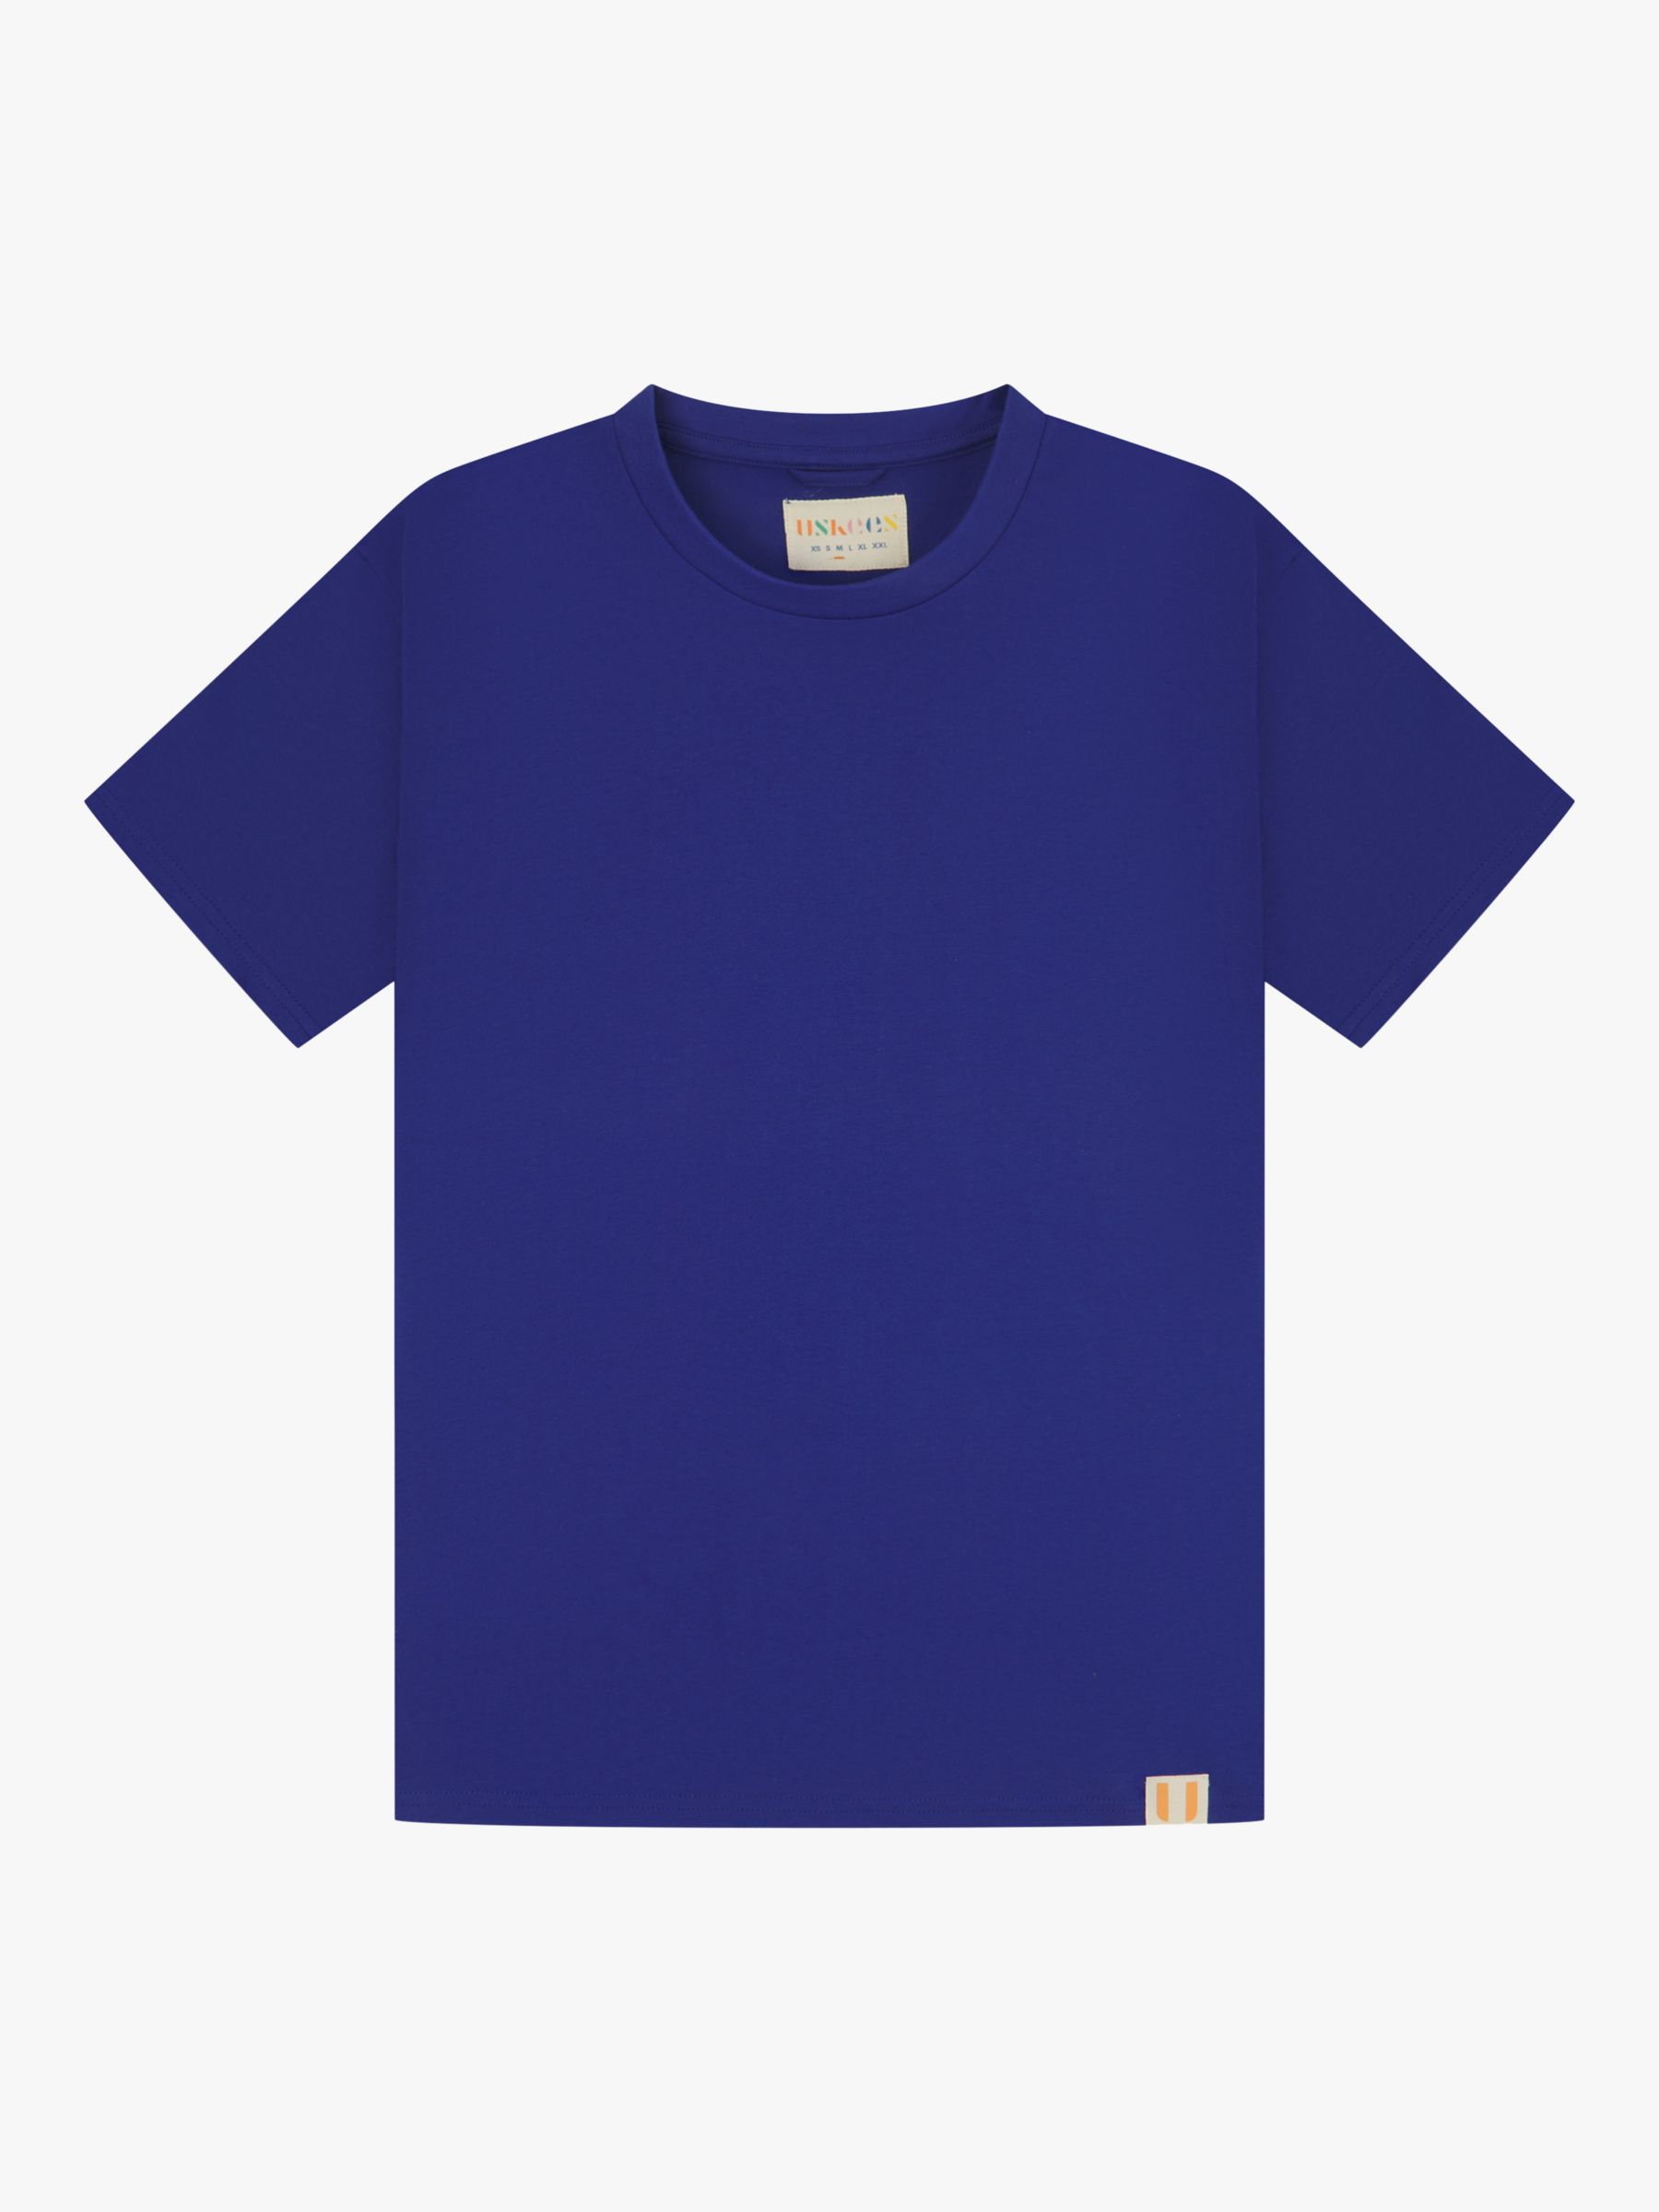 Buy Uskees Organic Cotton Jersey T-Shirt Online at johnlewis.com